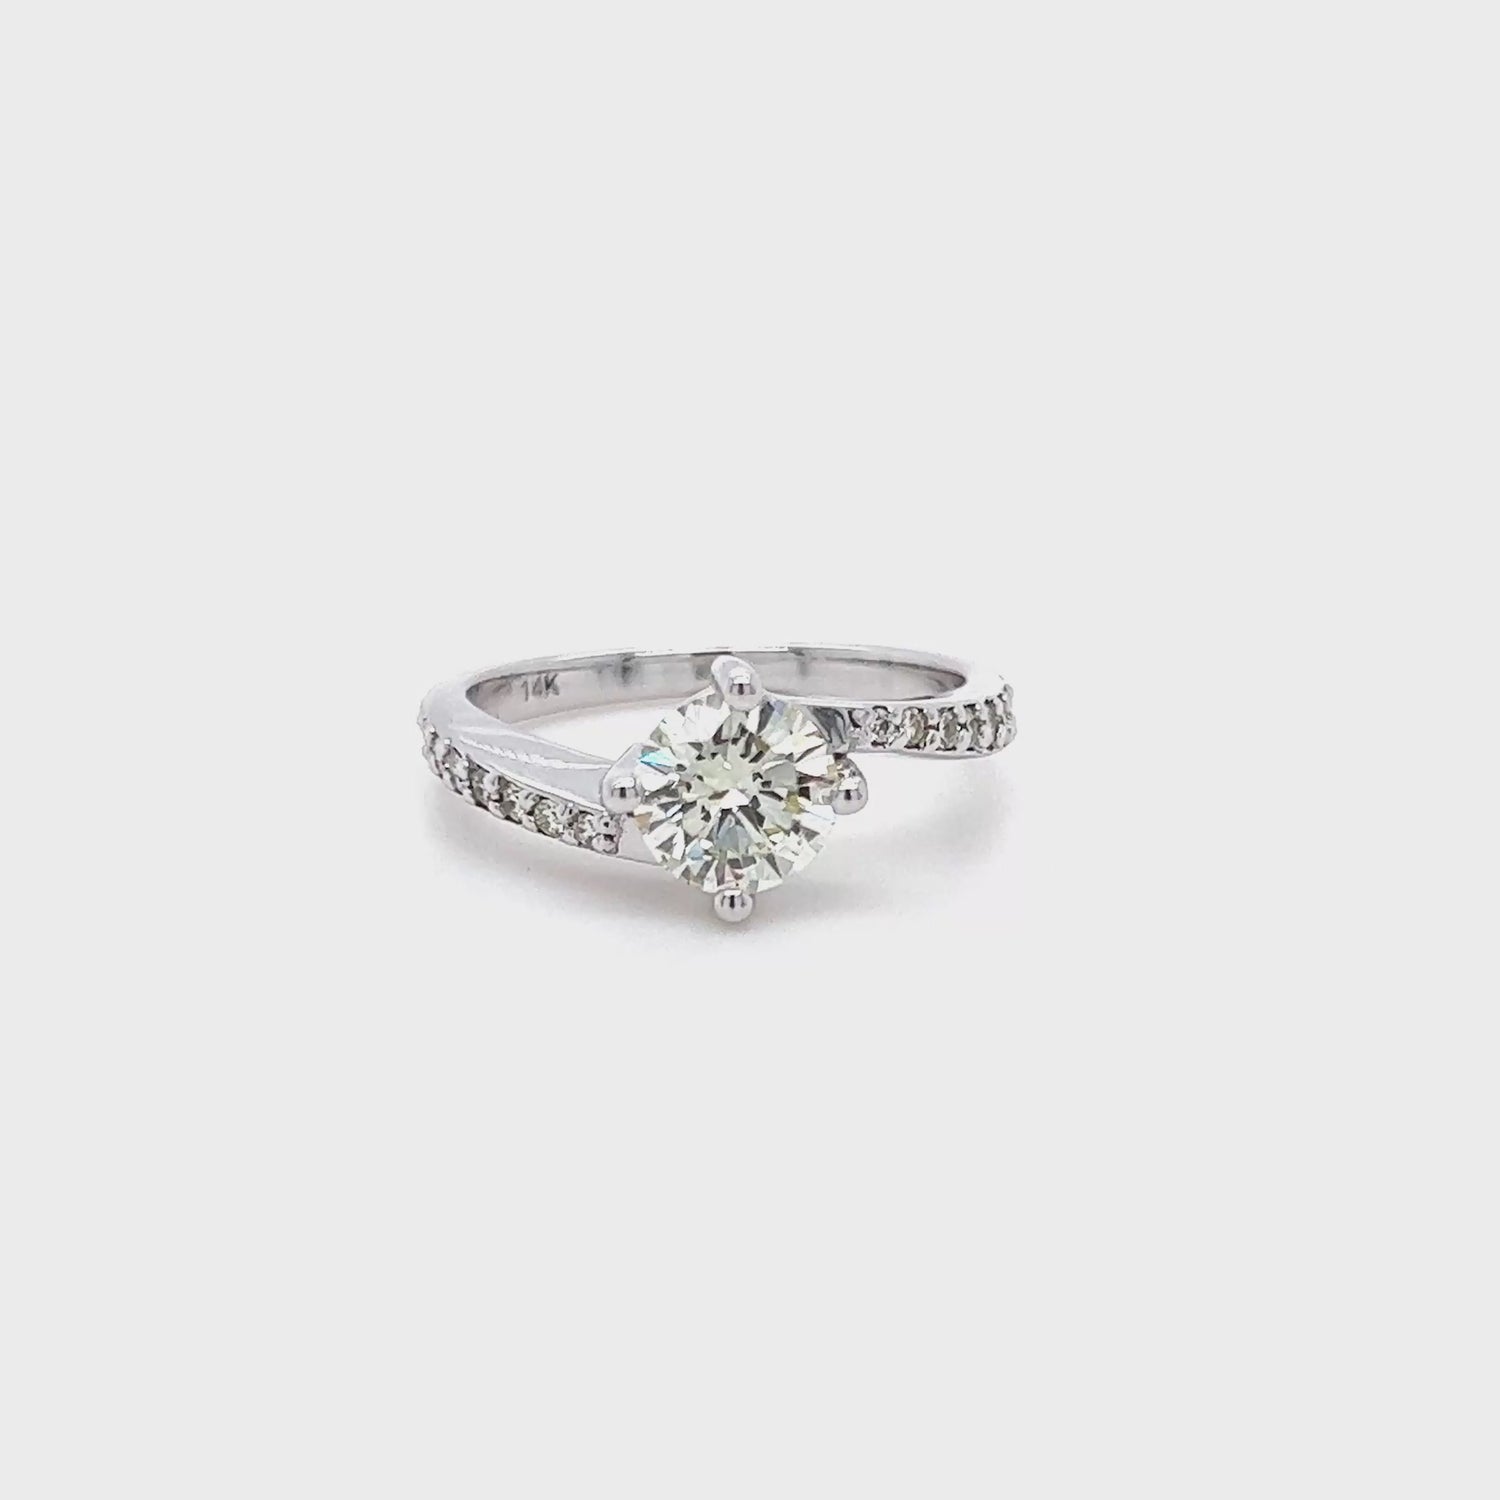 Certified 1.60 CT Round Cut Diamond Engagement Ring in 14 KT White Gold